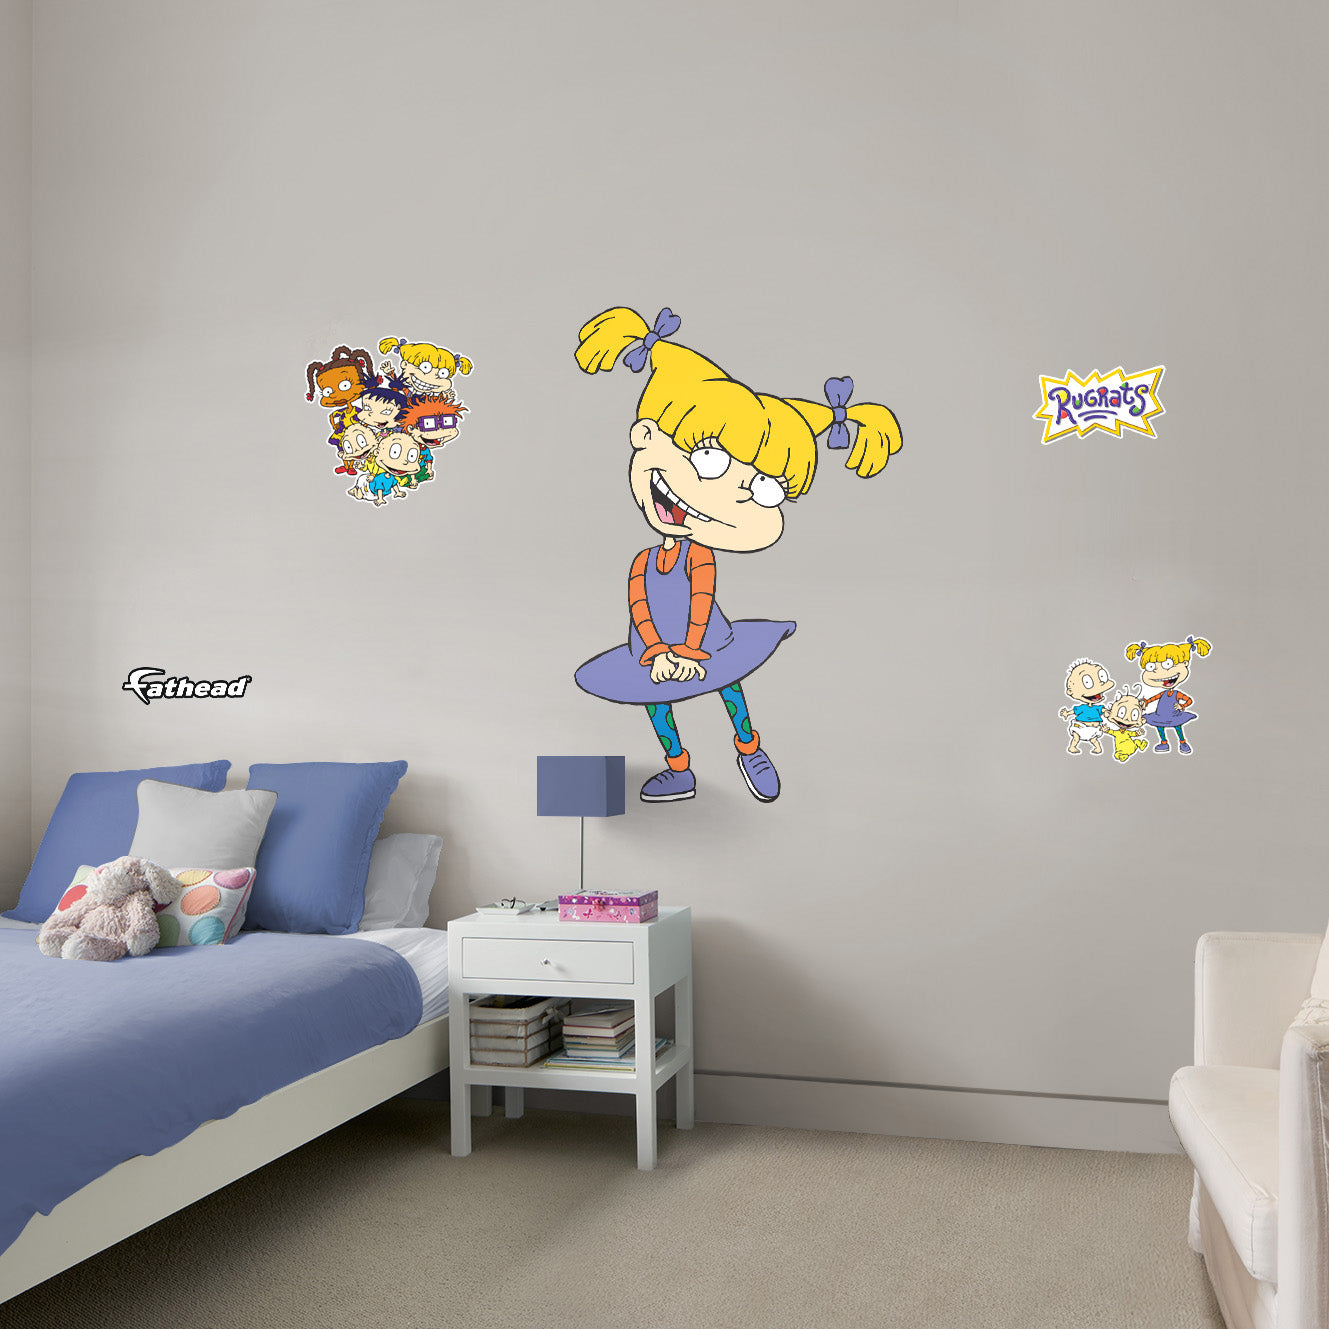 Giant Character +4 Decals (34.5"W x 53"H)